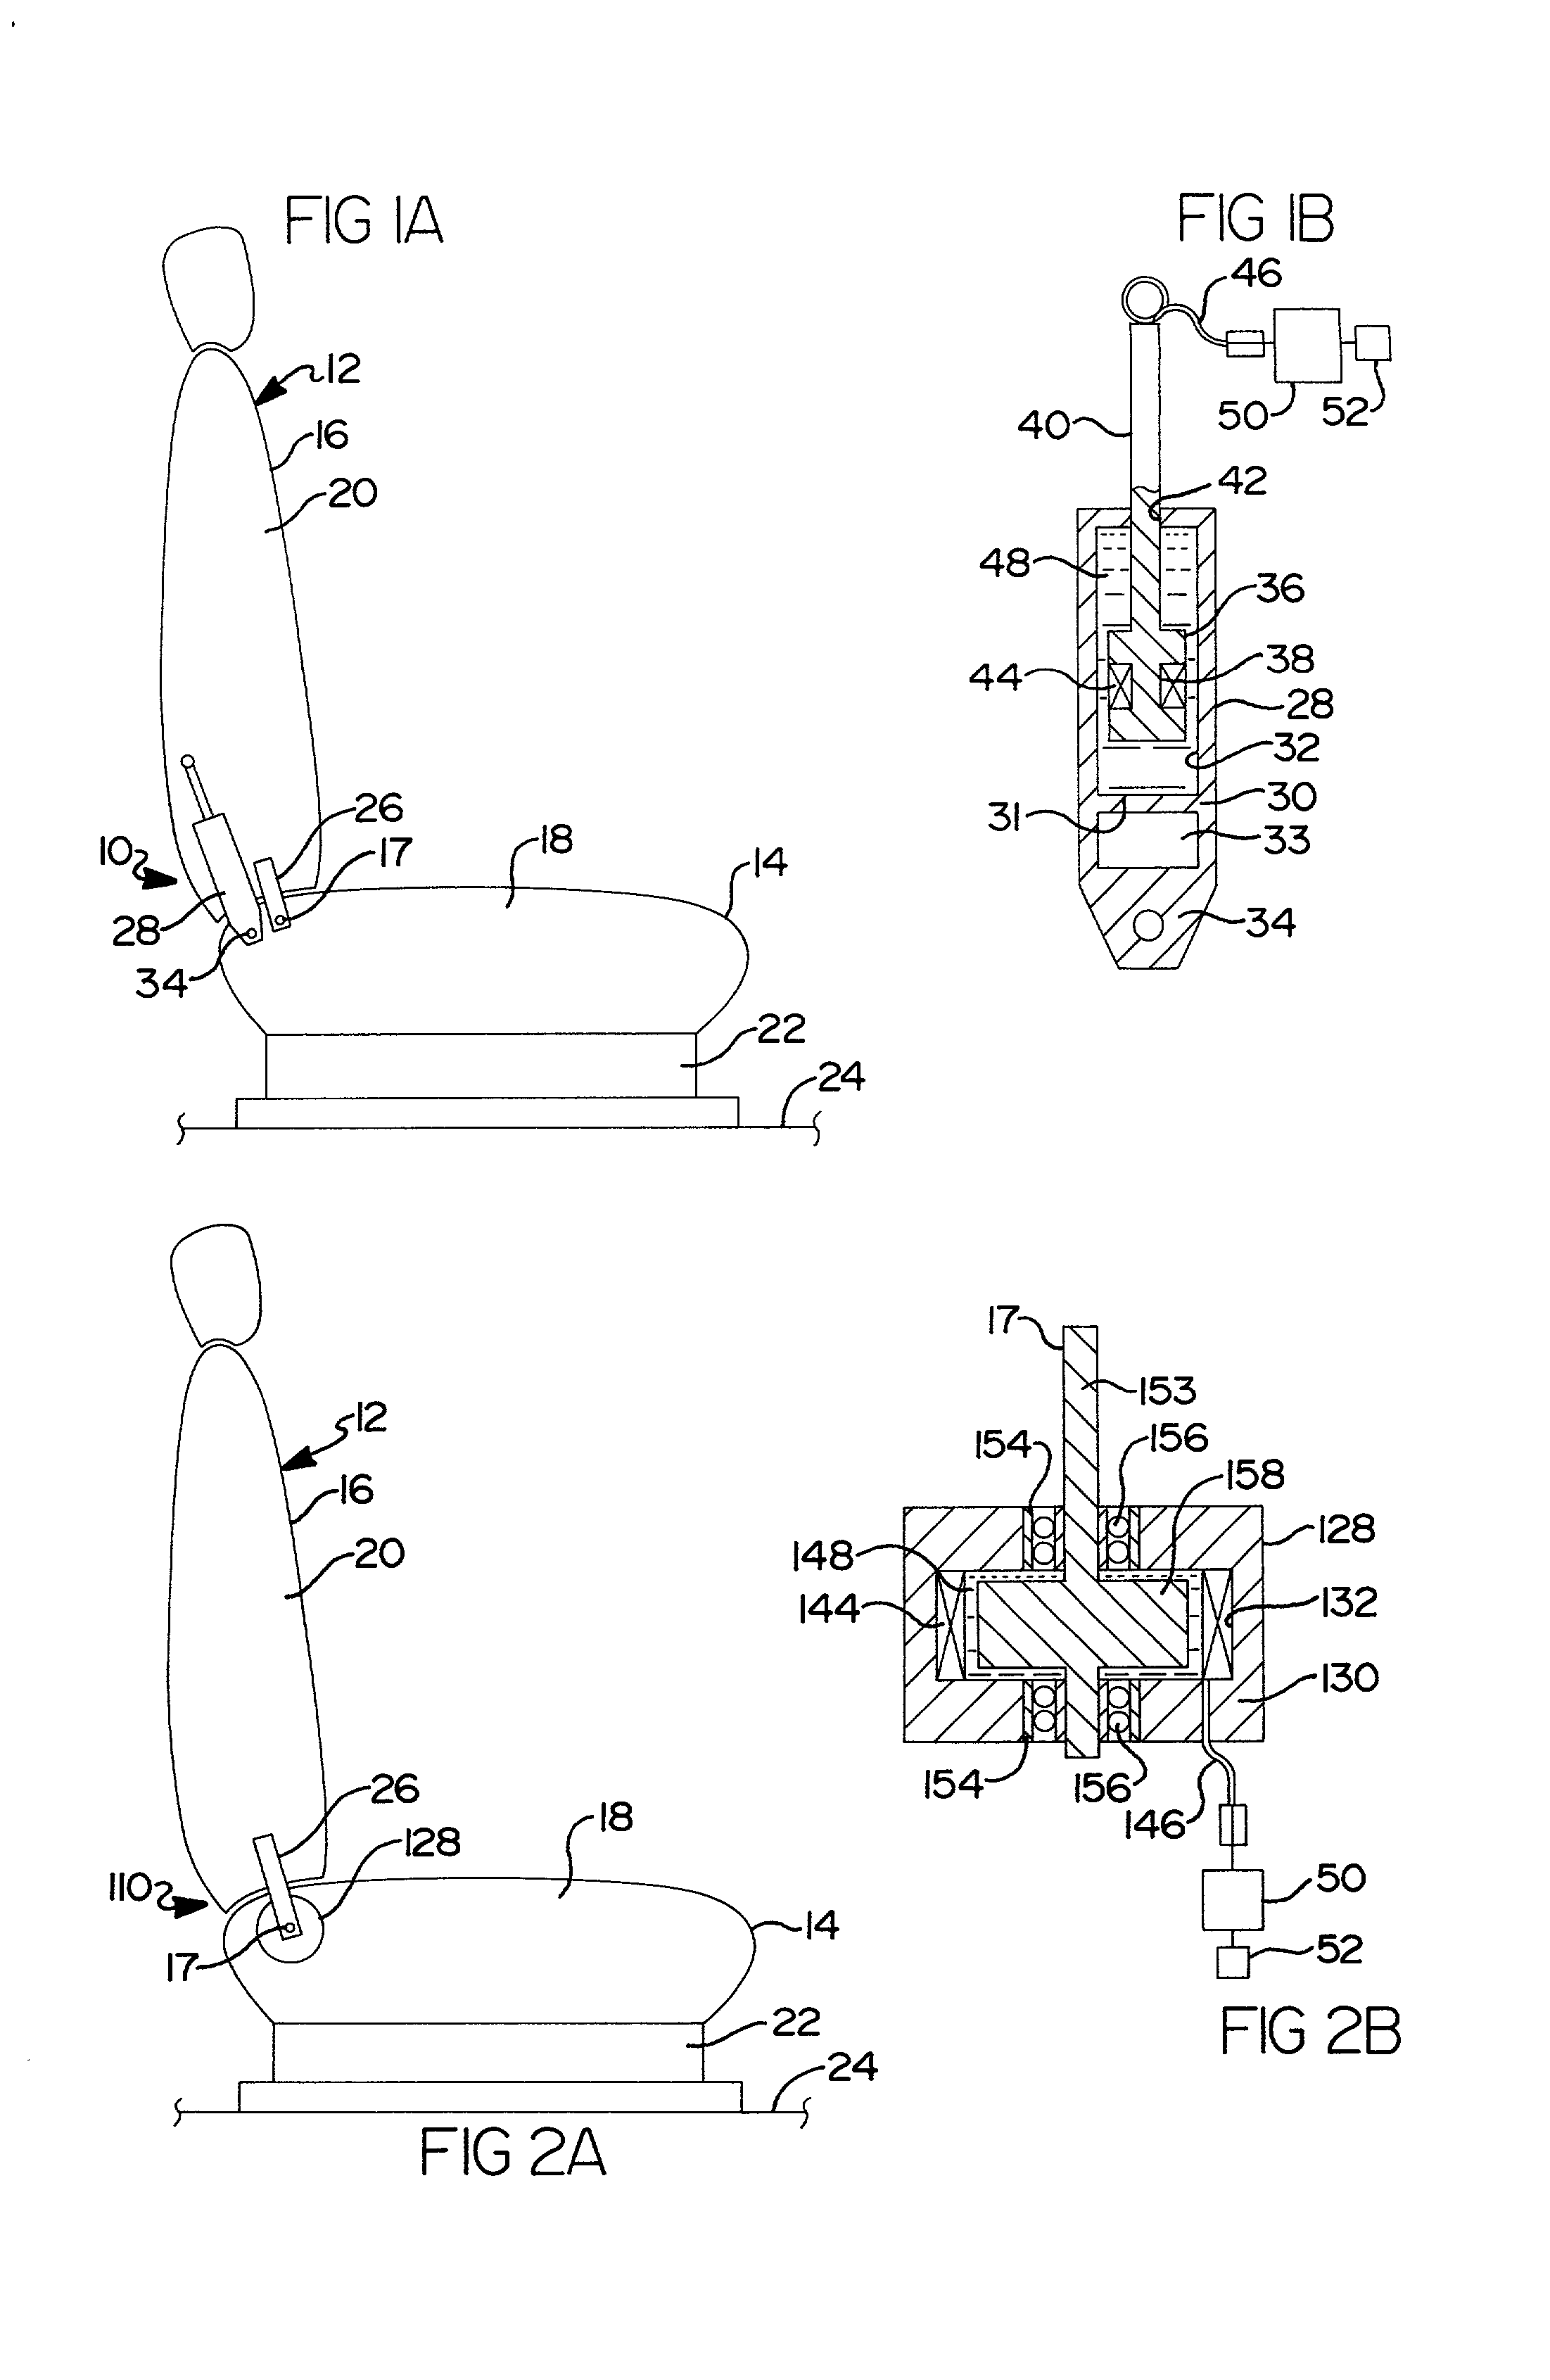 Programmable seat back damper assembly for seats